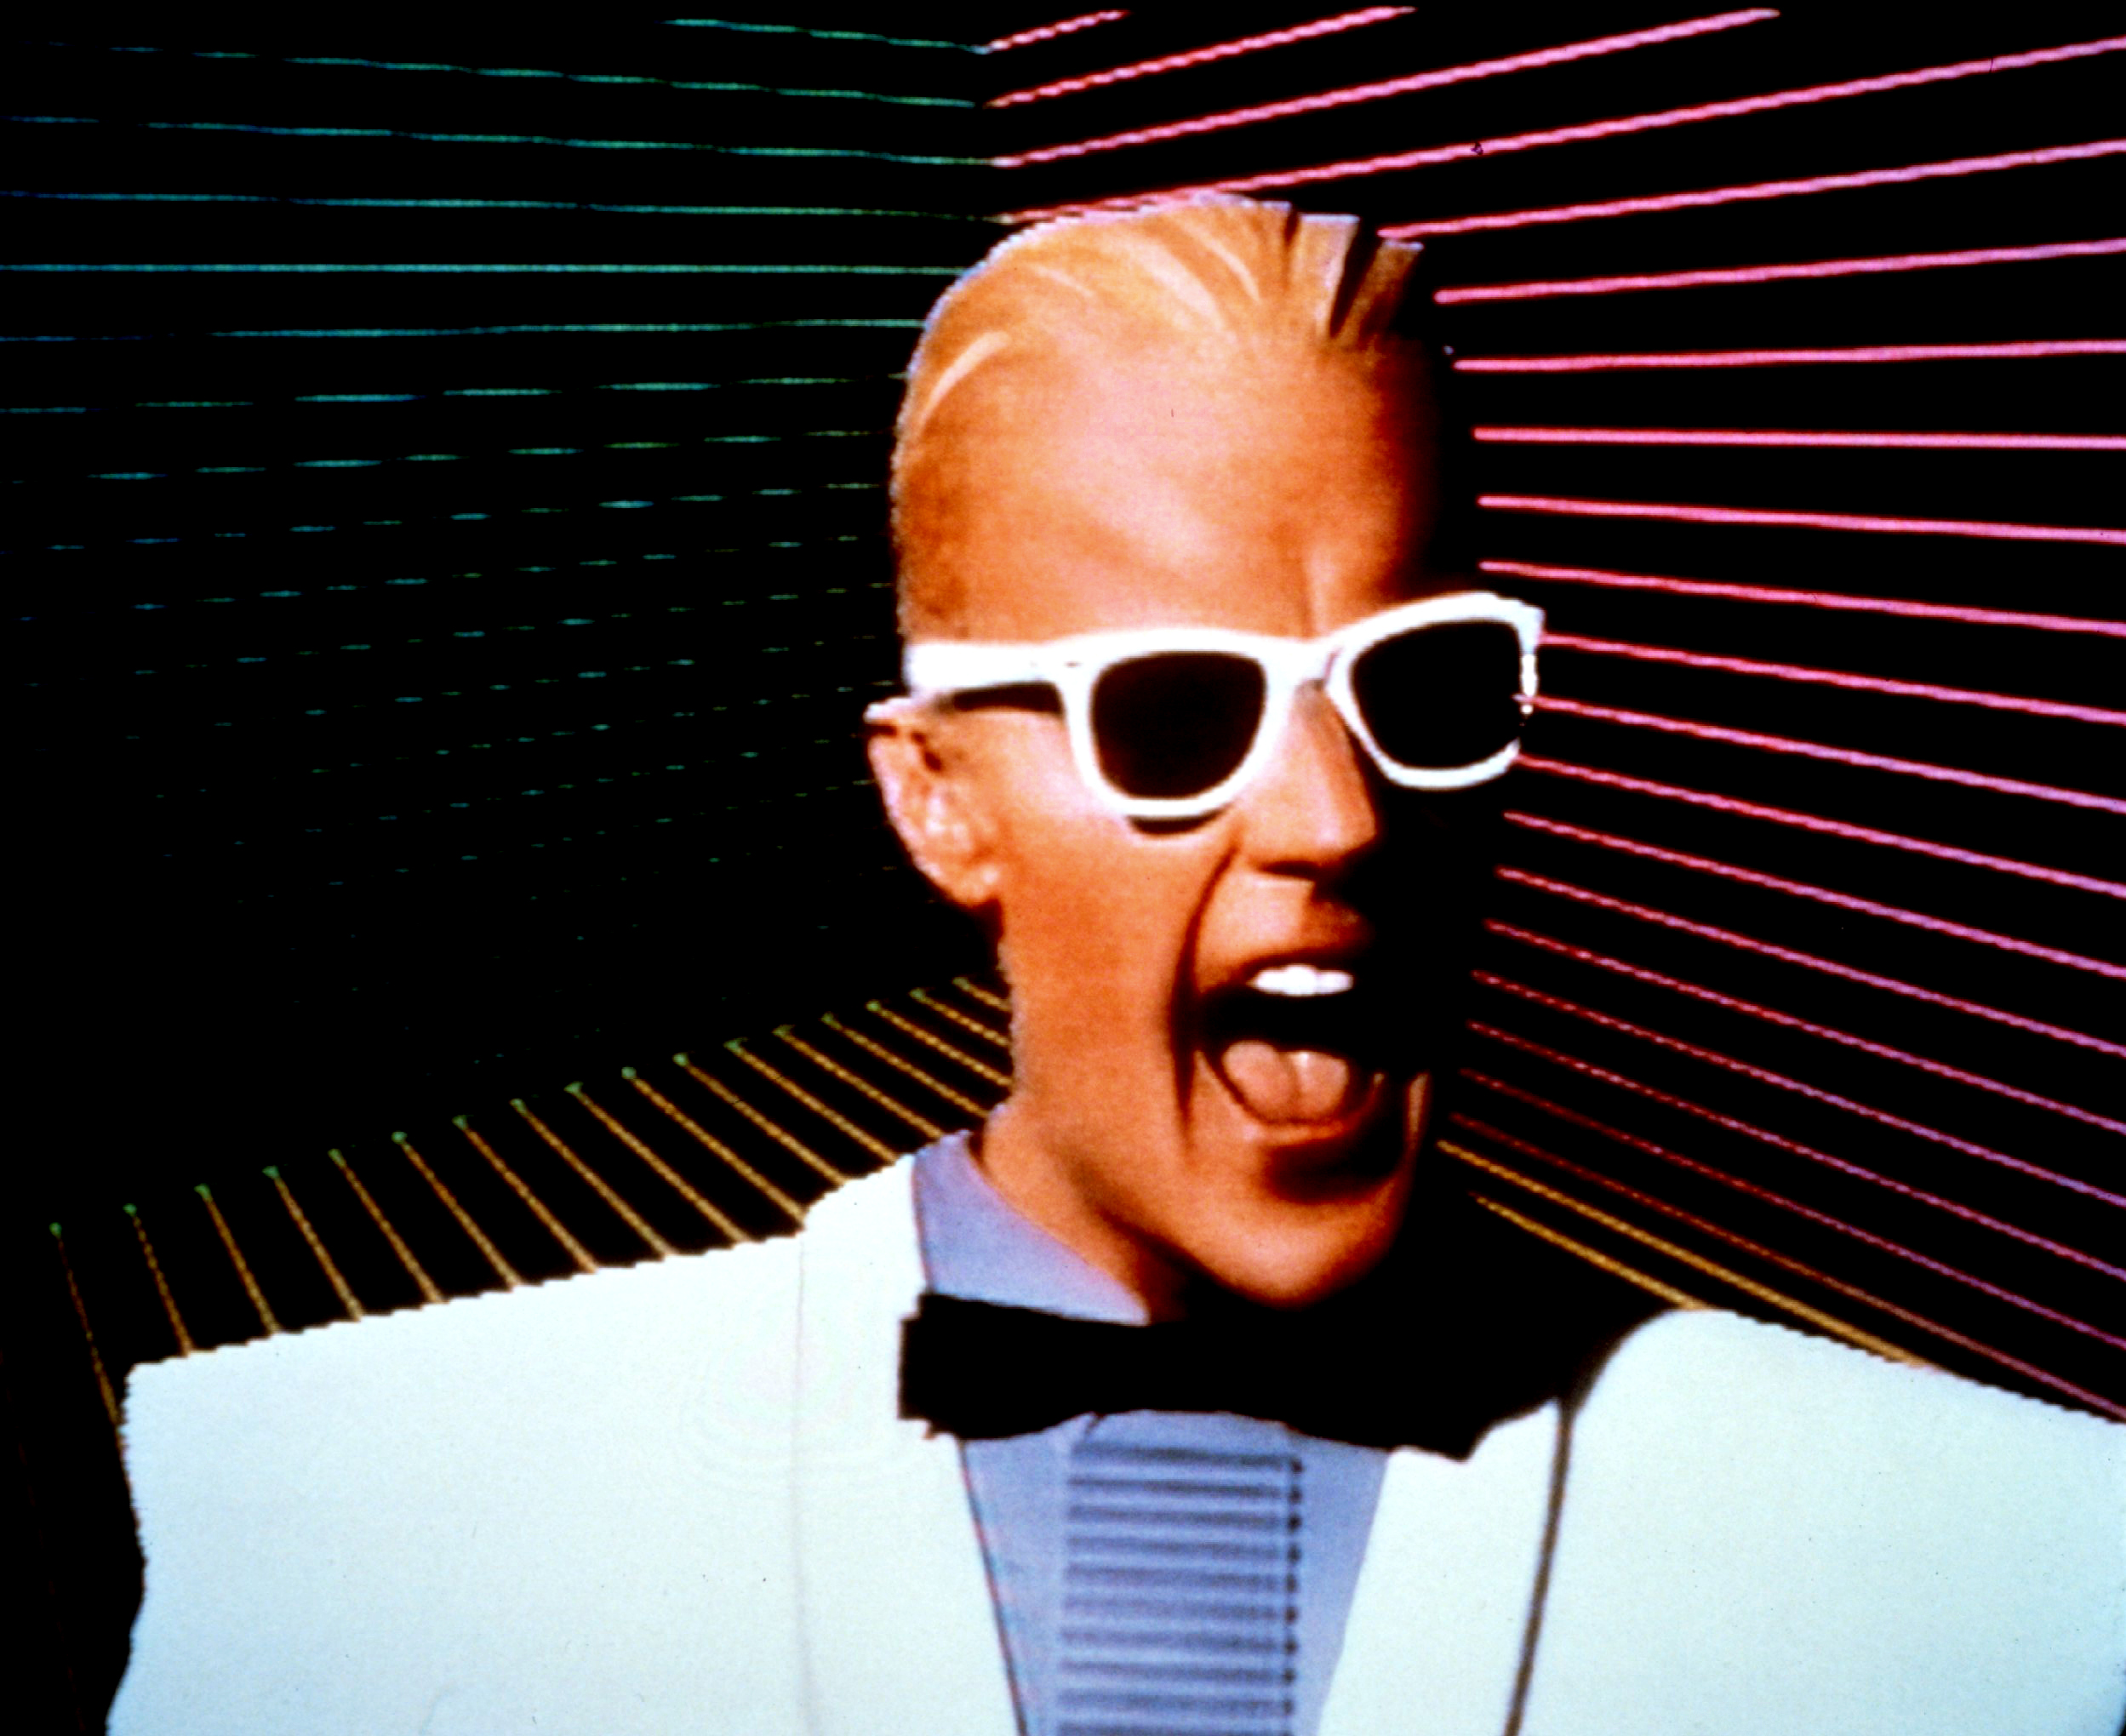 Long Live Max Headroom Geeks and Beats Podcast